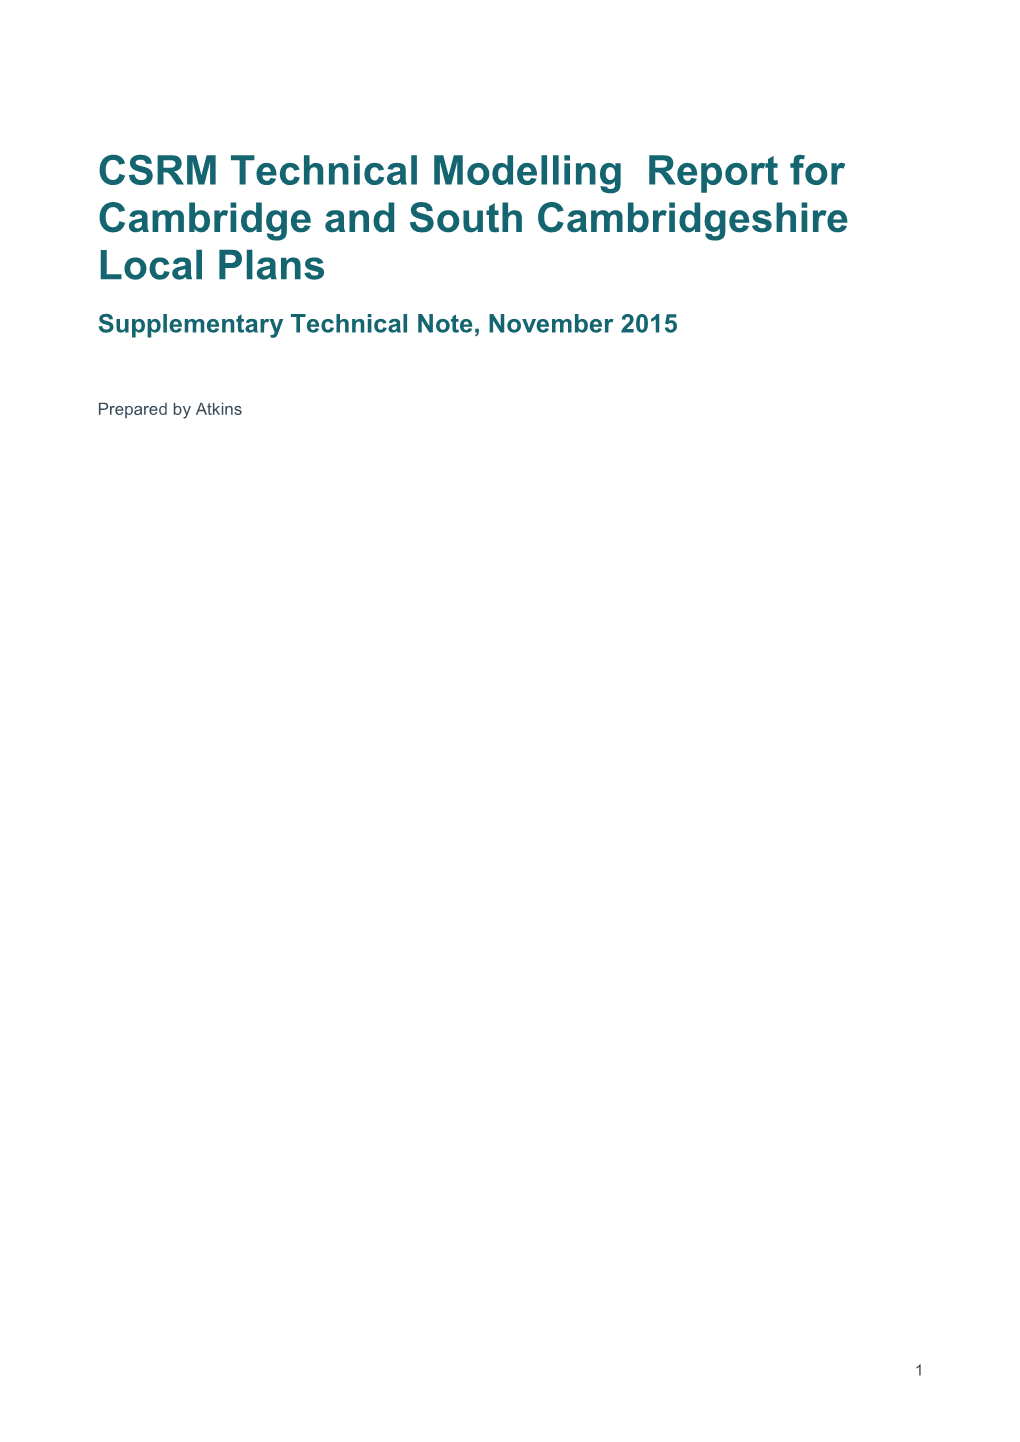 CSRM Technical Modelling Summary Report for Cambridge and South